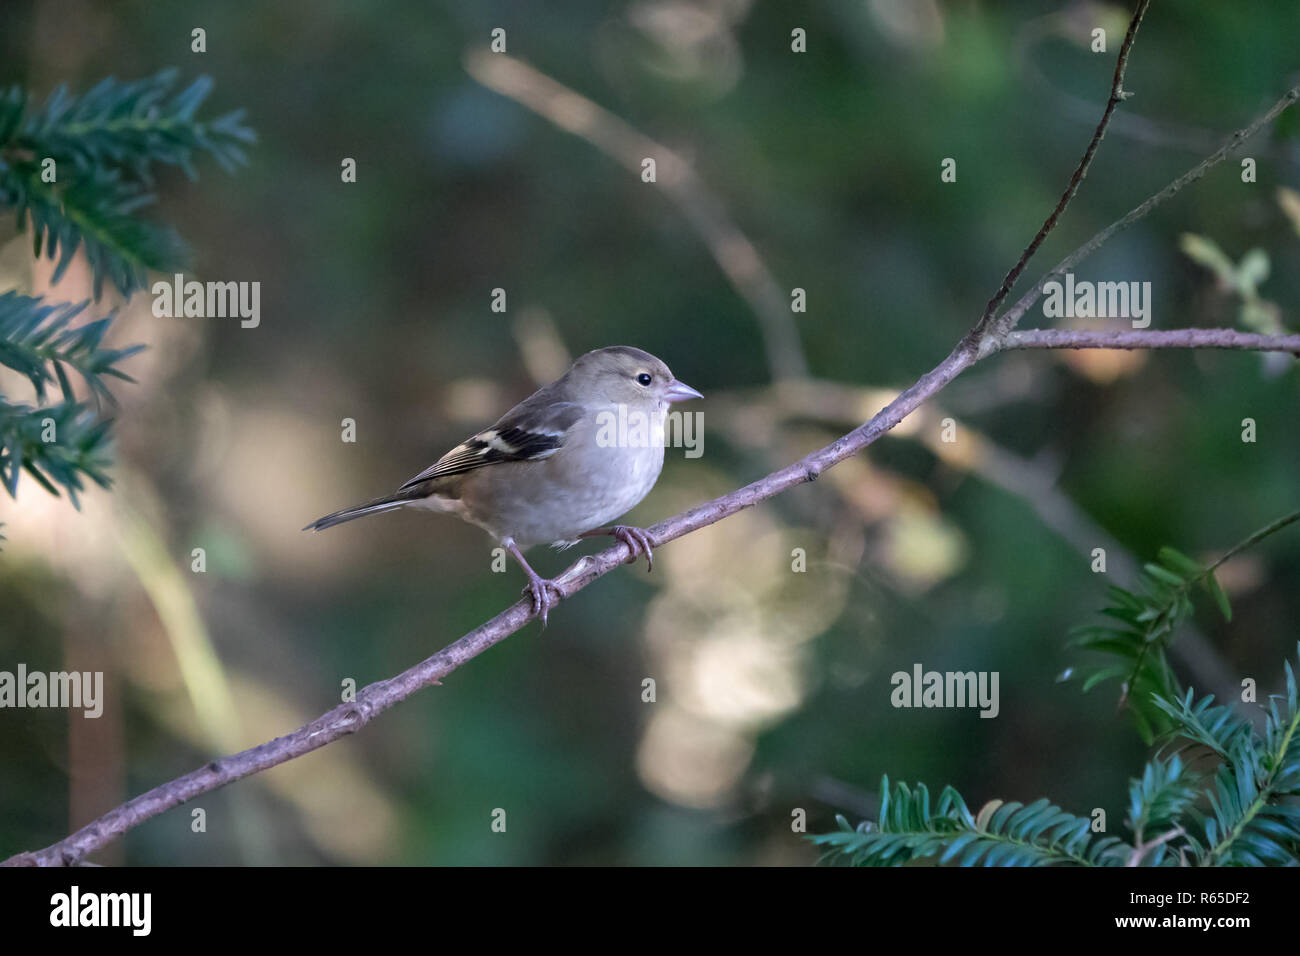 Female Chaffinch Perched in Woodland Stock Photo